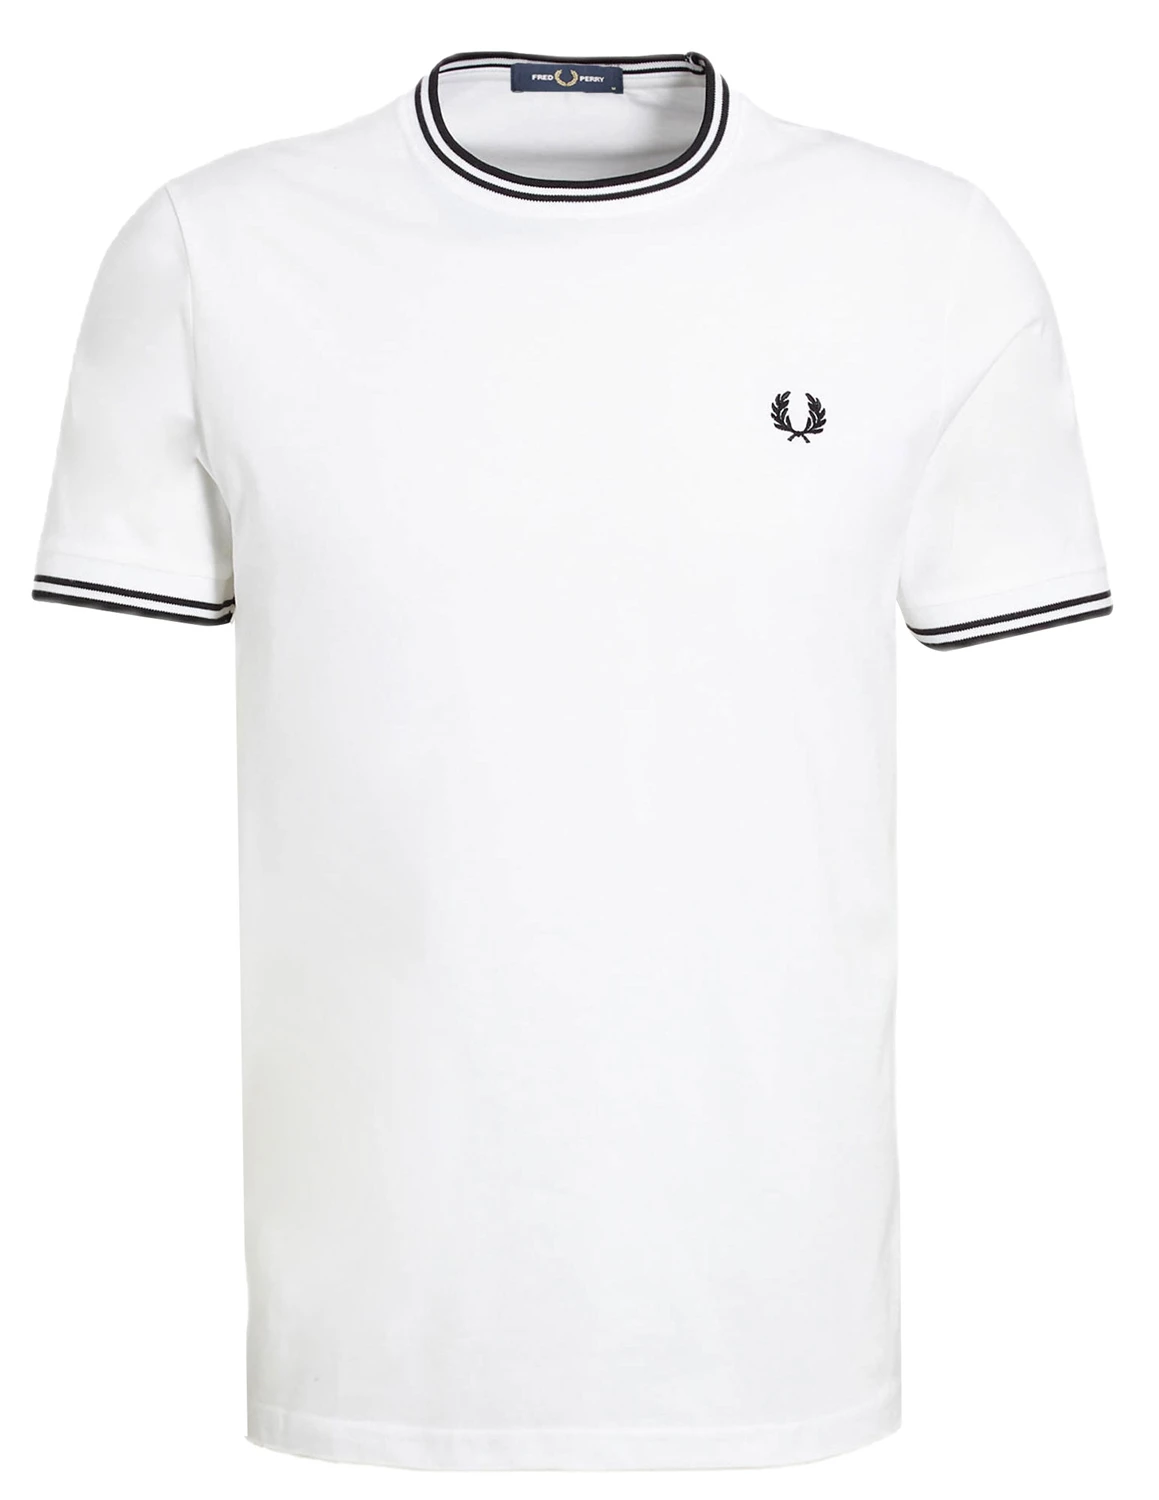 voorstel Klooster Pigment Fred Perry Twin Tipped T-Shirt M1588 wit kopen bij The Stone